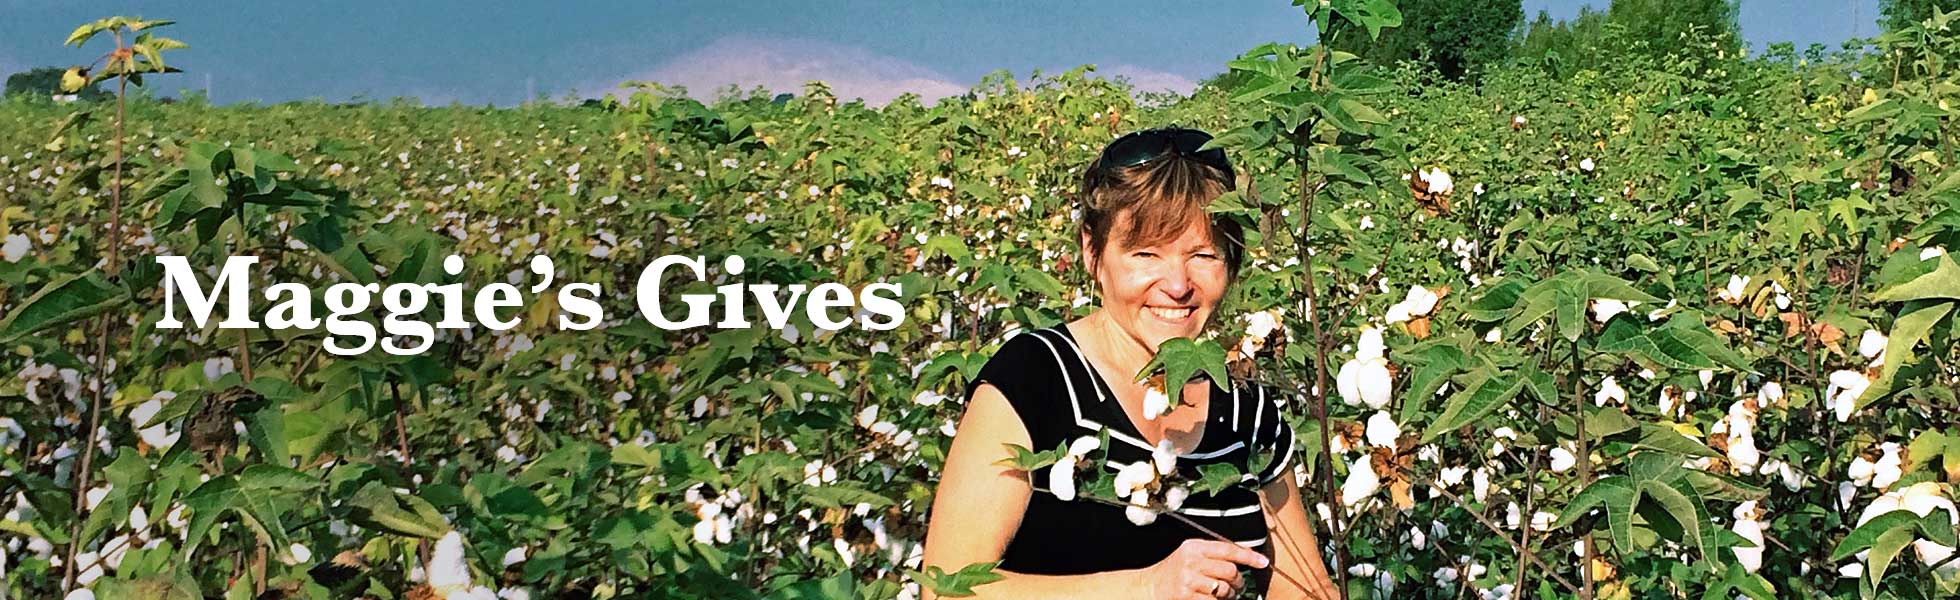 Person with short brown hair and light skin standing in a cotton field. Text next to them reads: Maggie’s Gives.